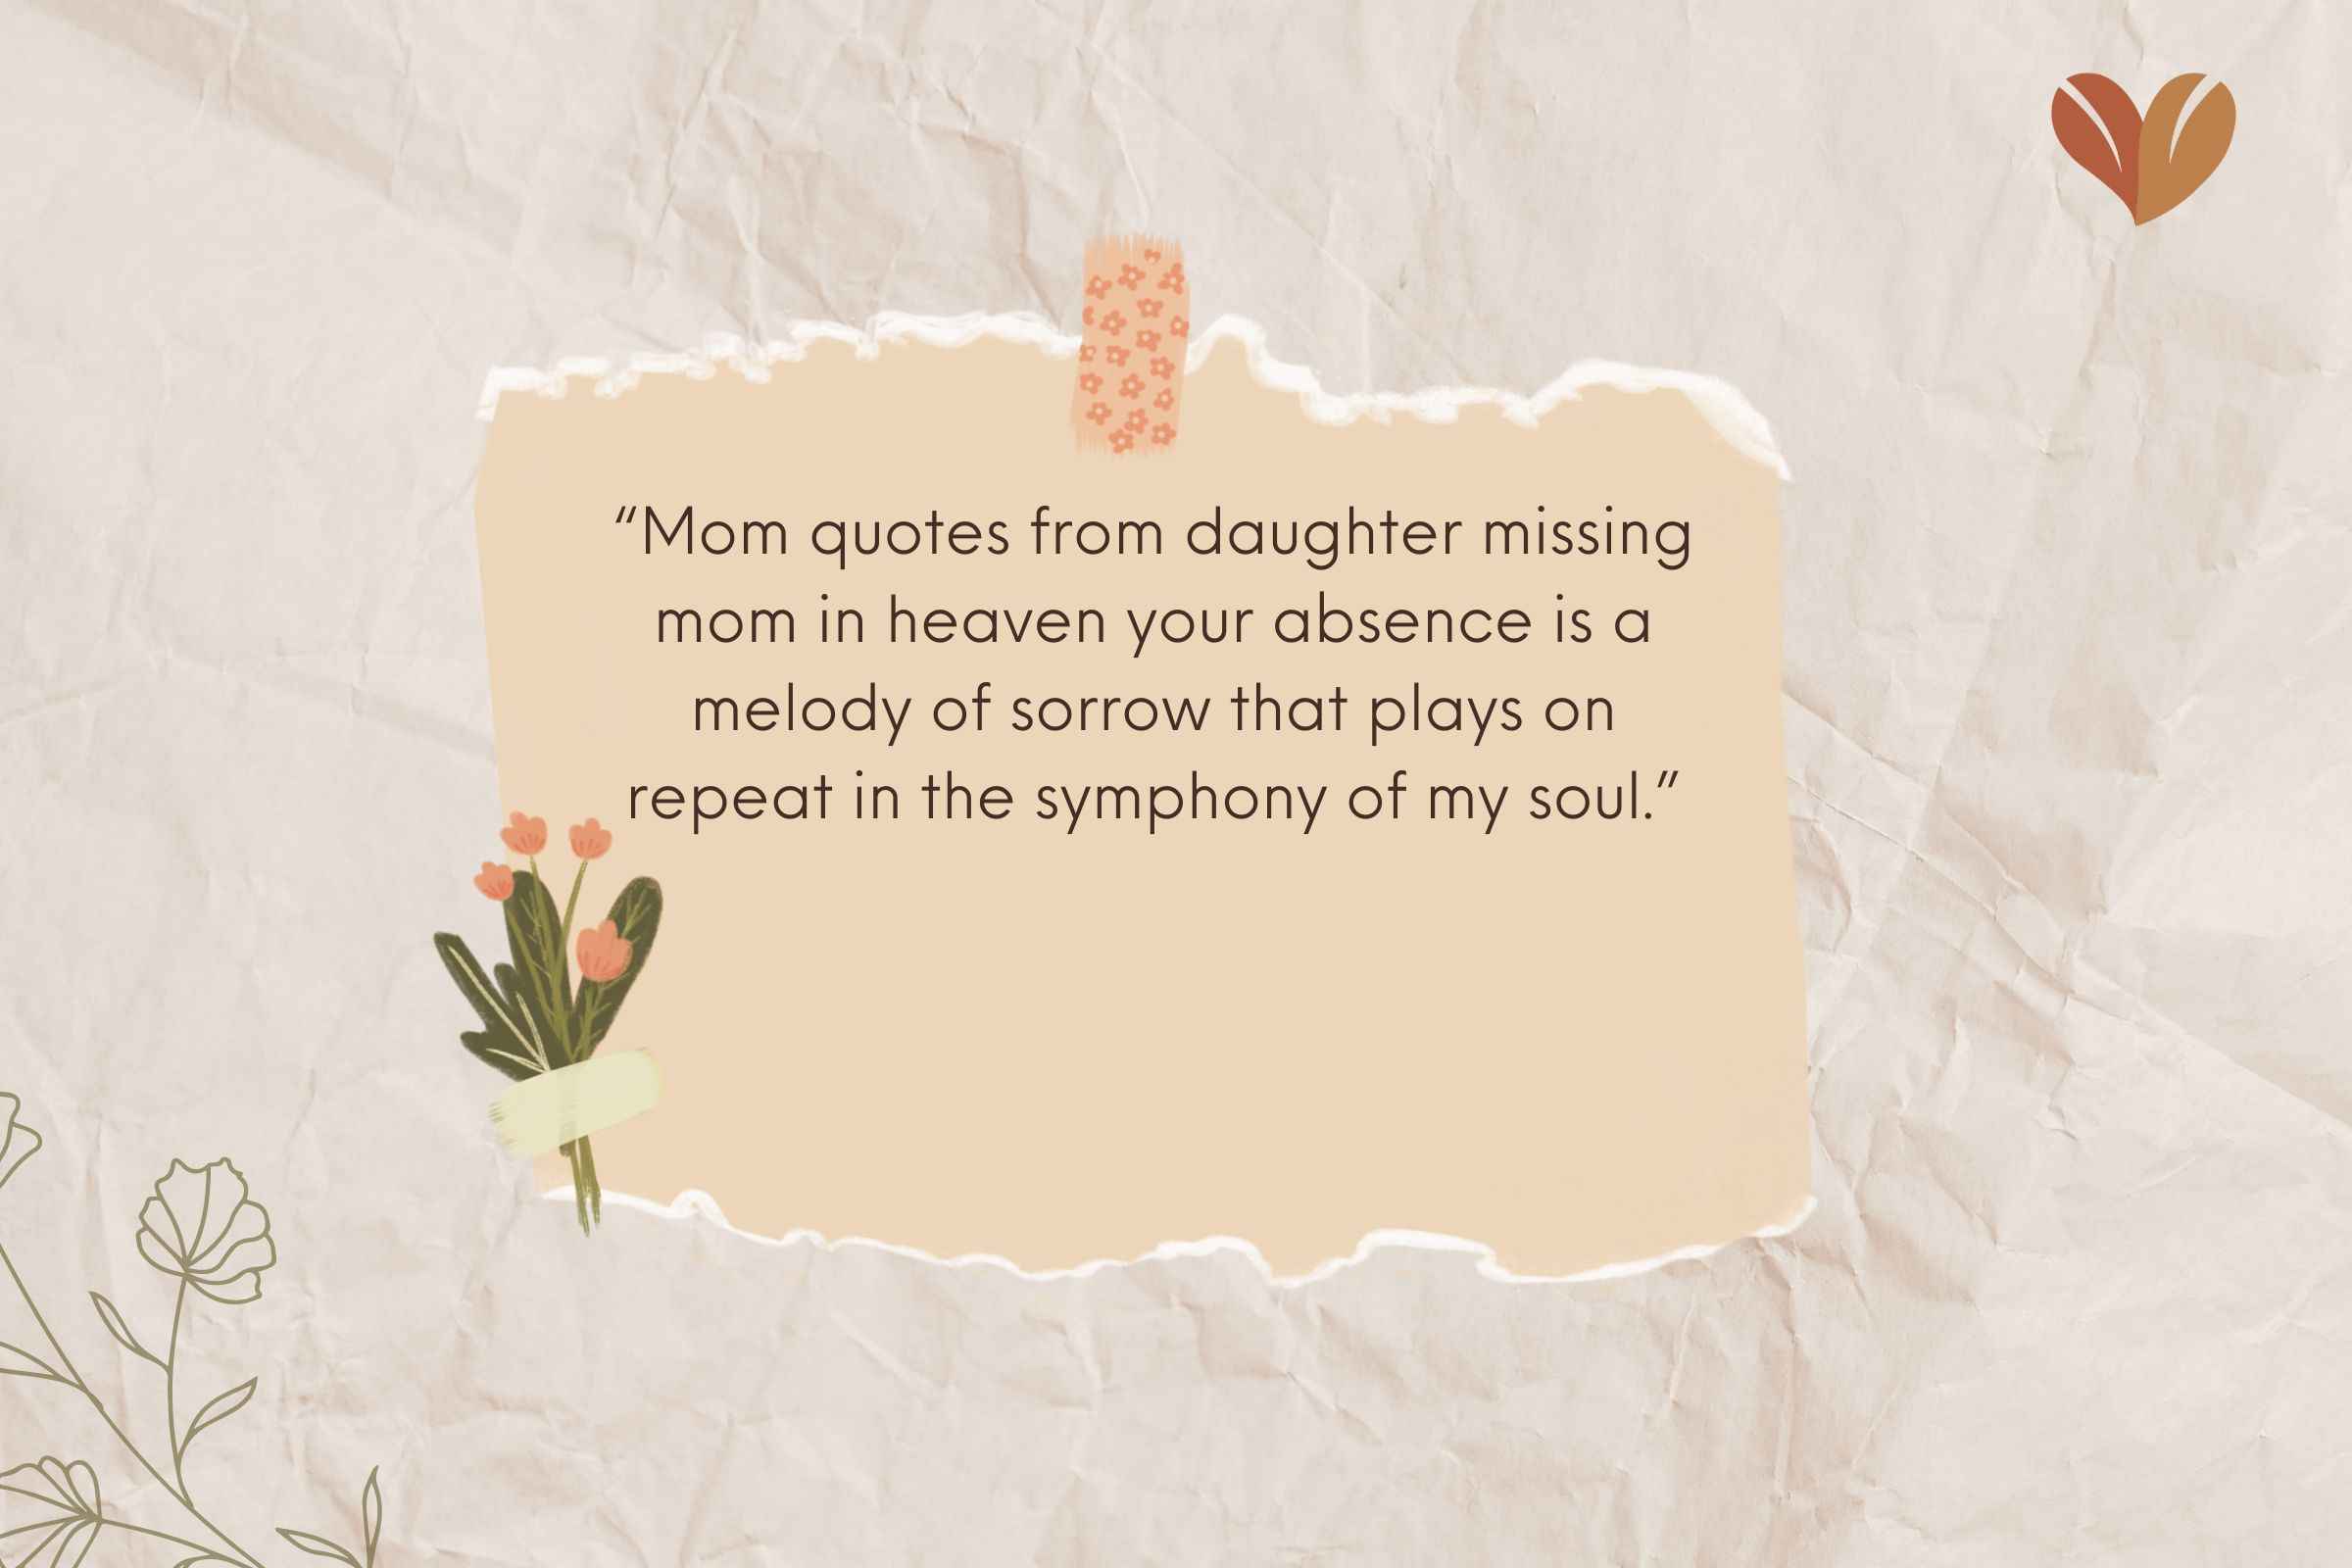 “Mom quotes from daughter missing mom in heaven your absence is a melody of sorrow that plays on repeat in the symphony of my soul.”